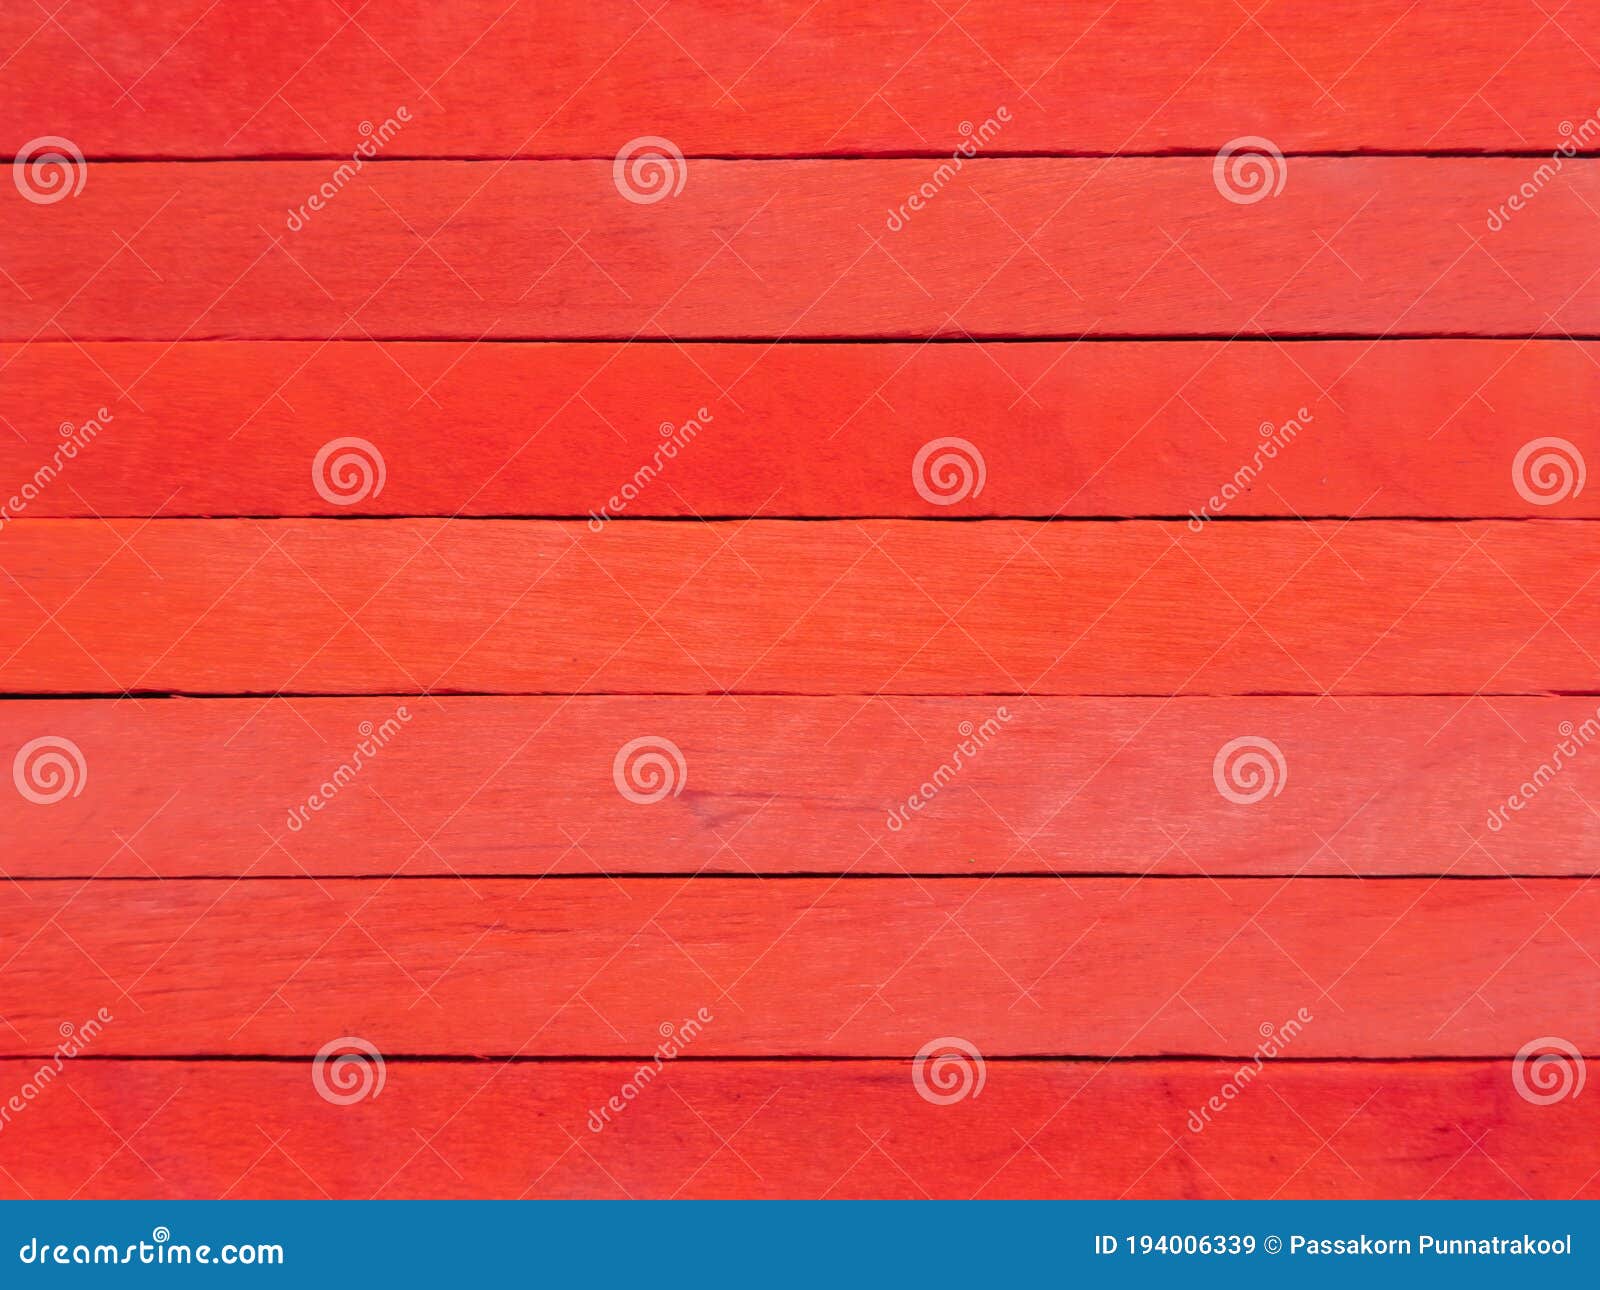 Red and Wooden Pattern Popsicle Sticks. Stock Image - Image of decor,  modern: 194006339